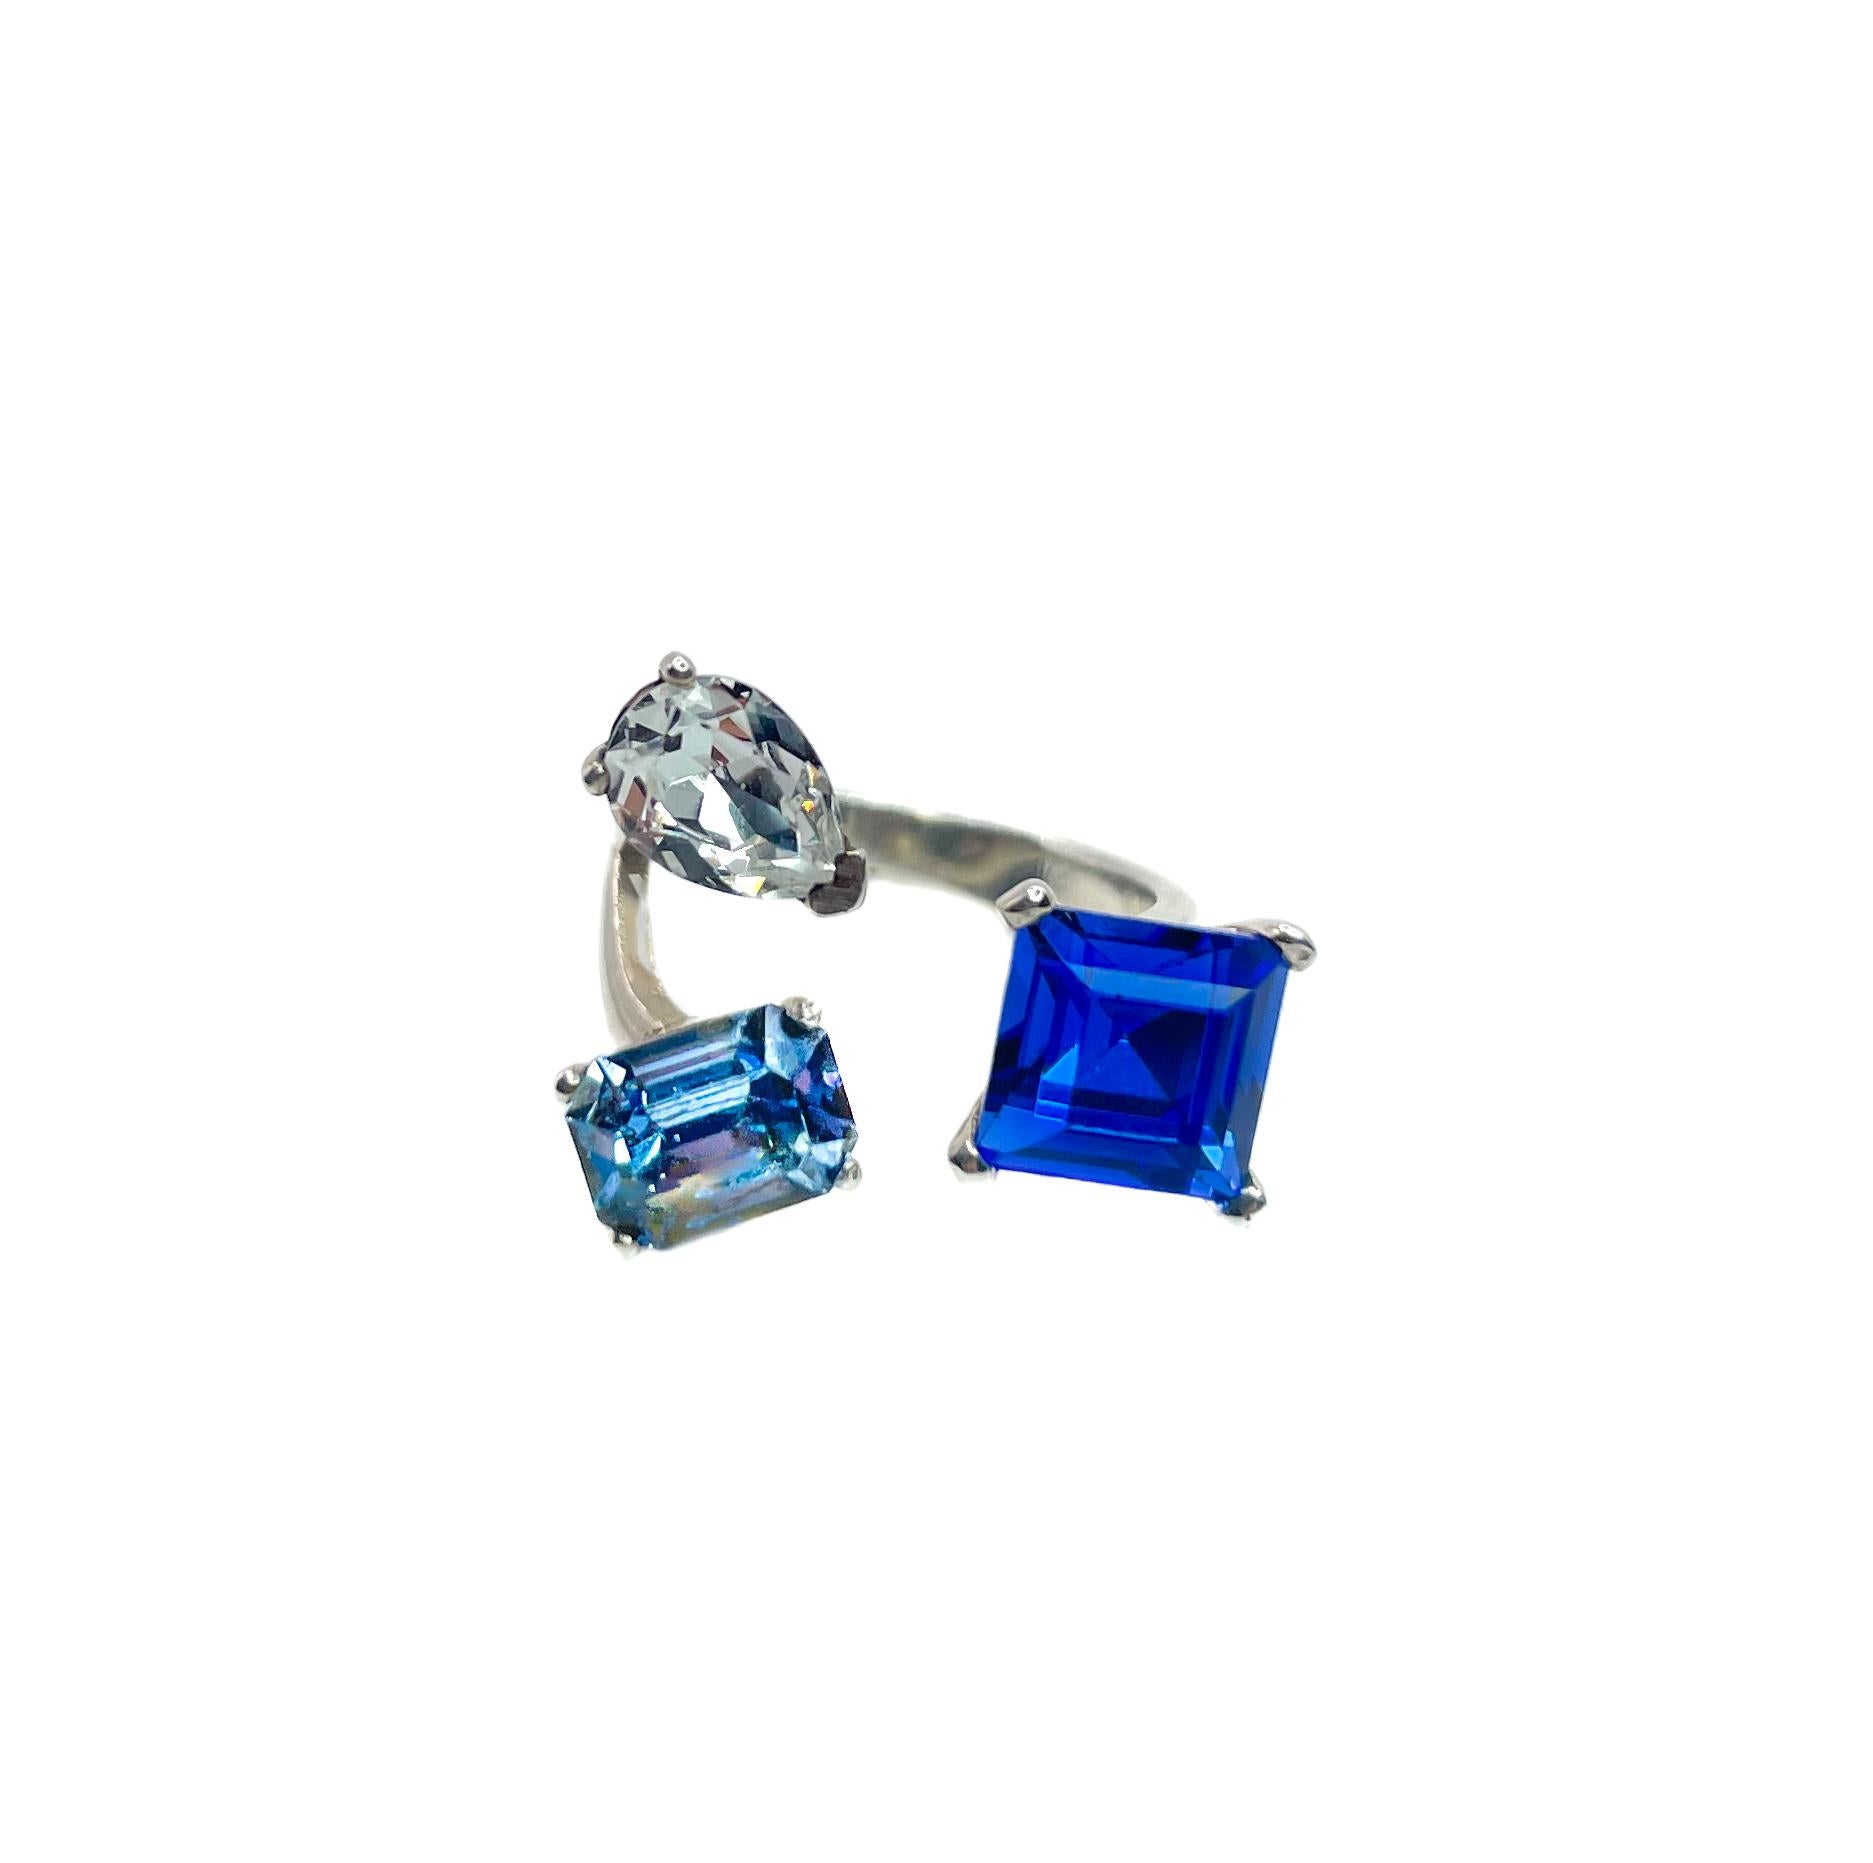 This unique PONTIEL cocktail ring features a trio of floating crystal stones. The stones give the dazzling illusion of floating weightlessly over the wearer's finger. 

This ring is set with three crystal stones: a sapphire cushion shape (8x8mm), a